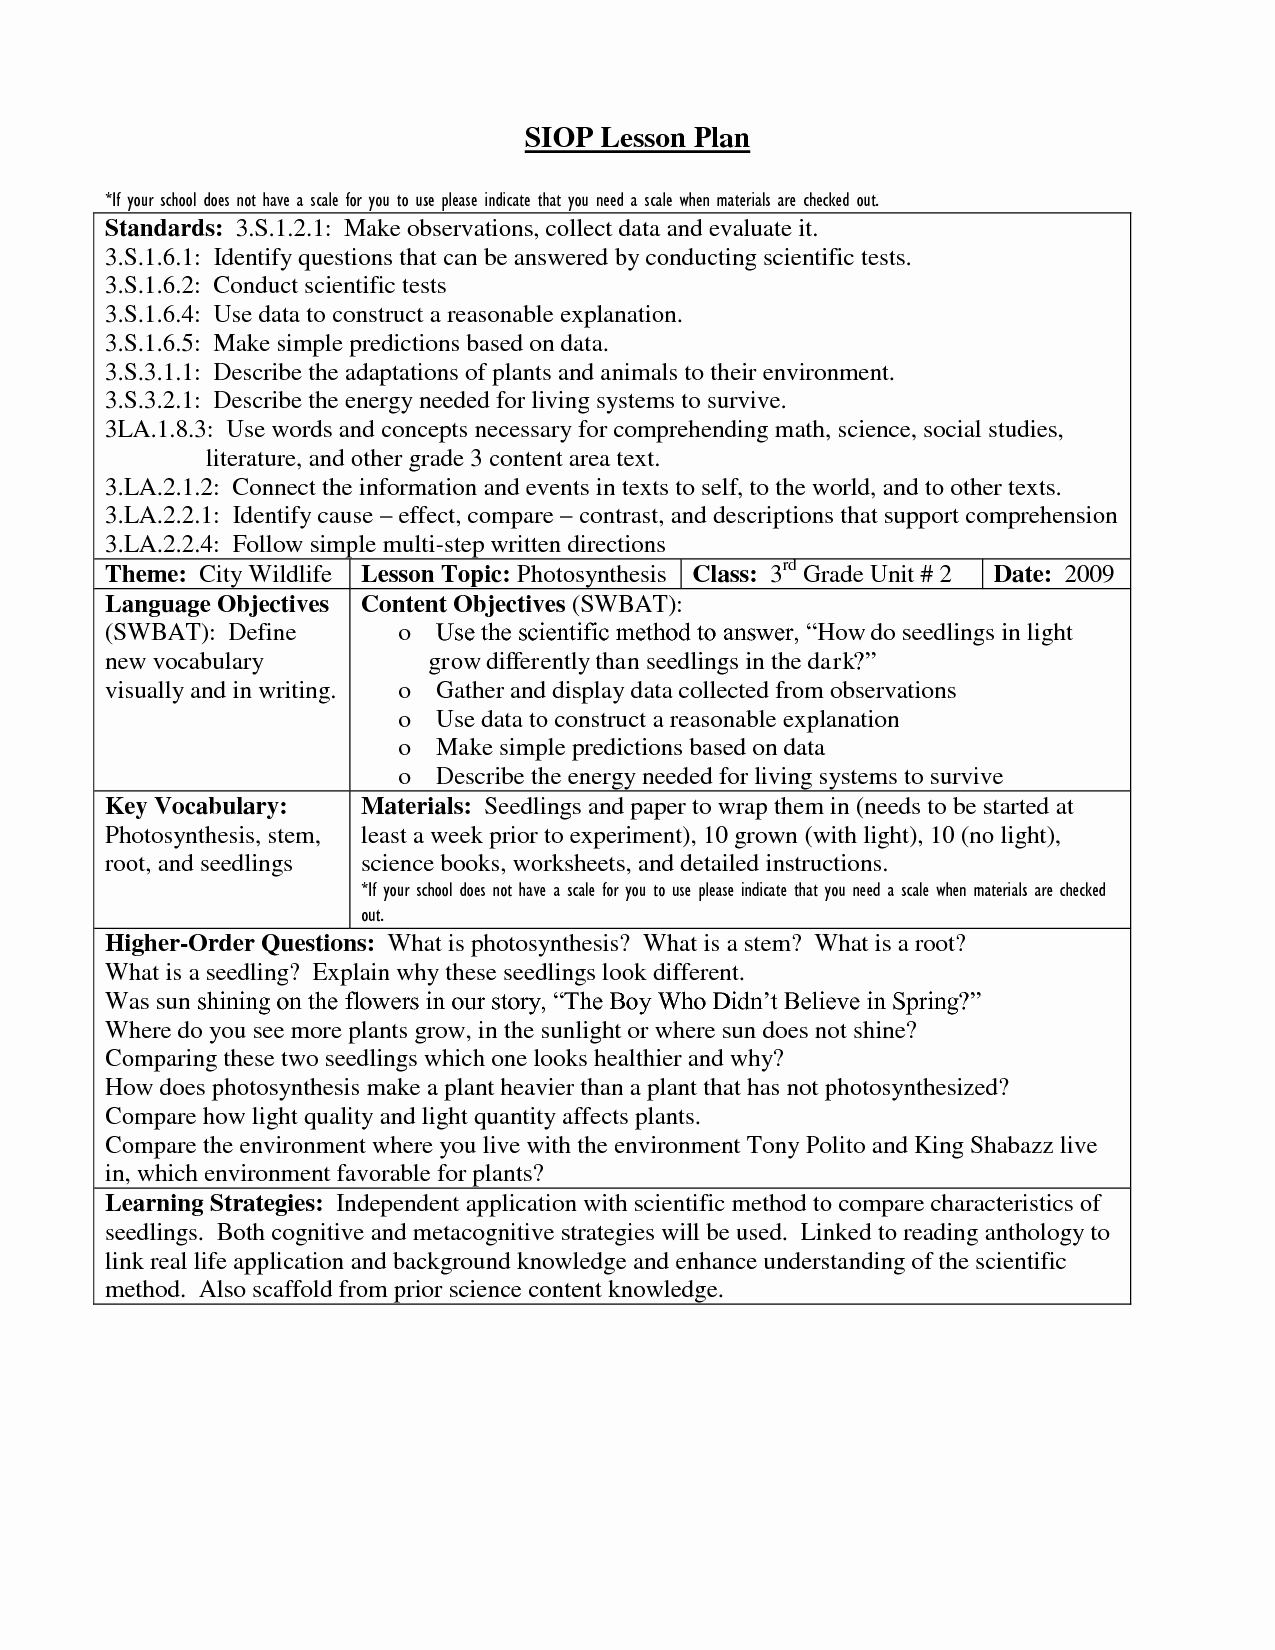 Siop Lesson Plan Template 2 Lovely 16 Awesome Siop Lesson Plan Template 2 Example